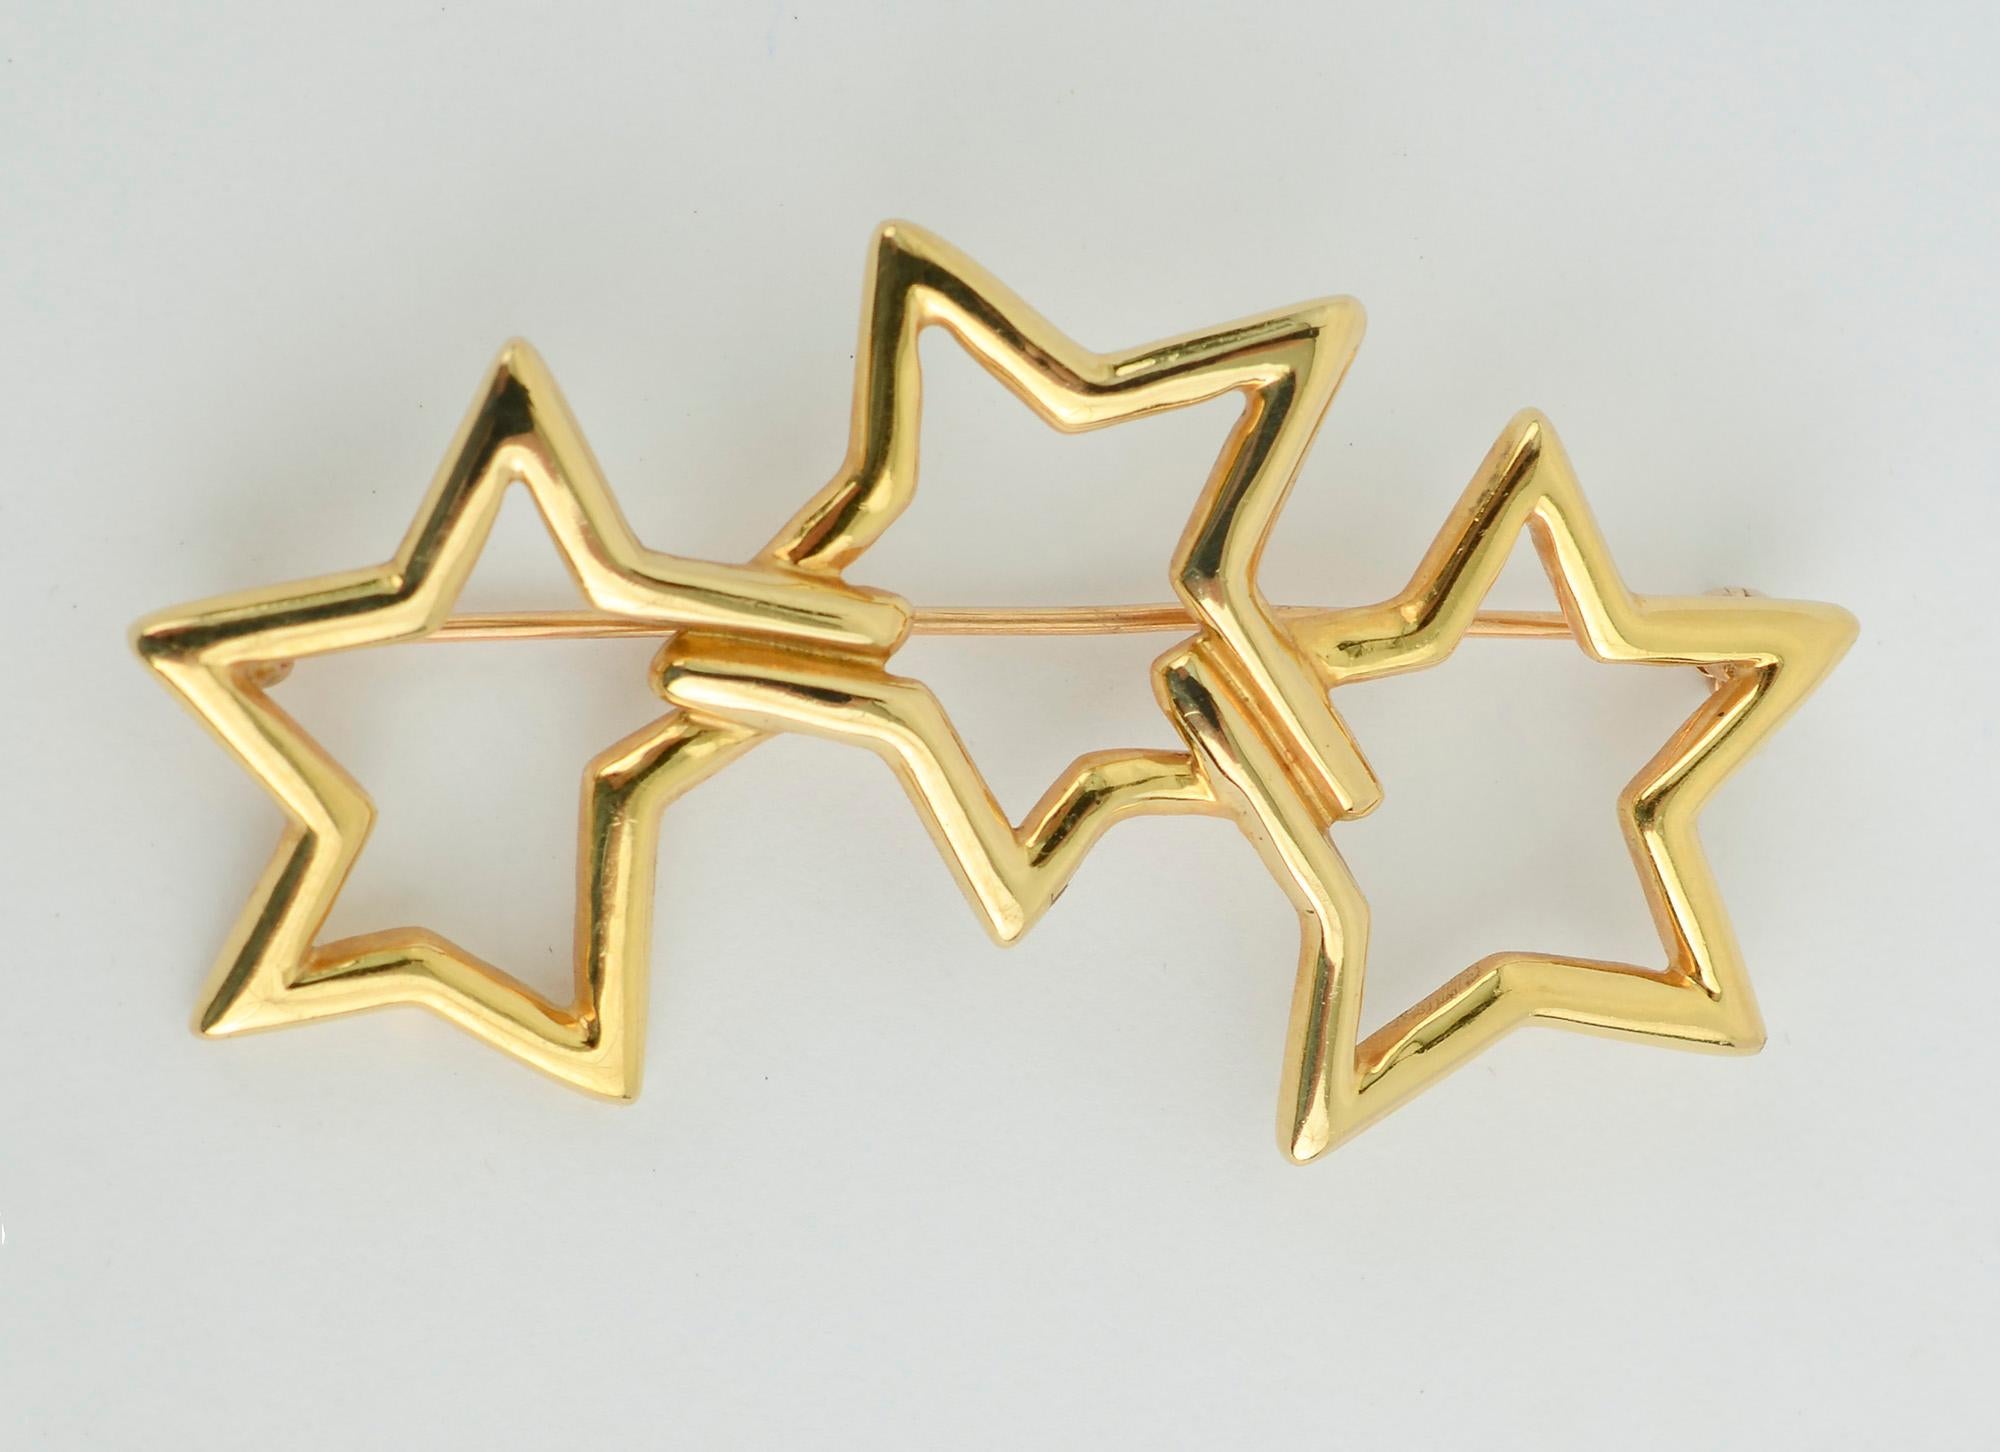 Irregular five point stars are combined to overlap in this airy brooch by Tiffany. It can be worn vertically or horizontally on a lapel.
It measures 2.07 inches in width.